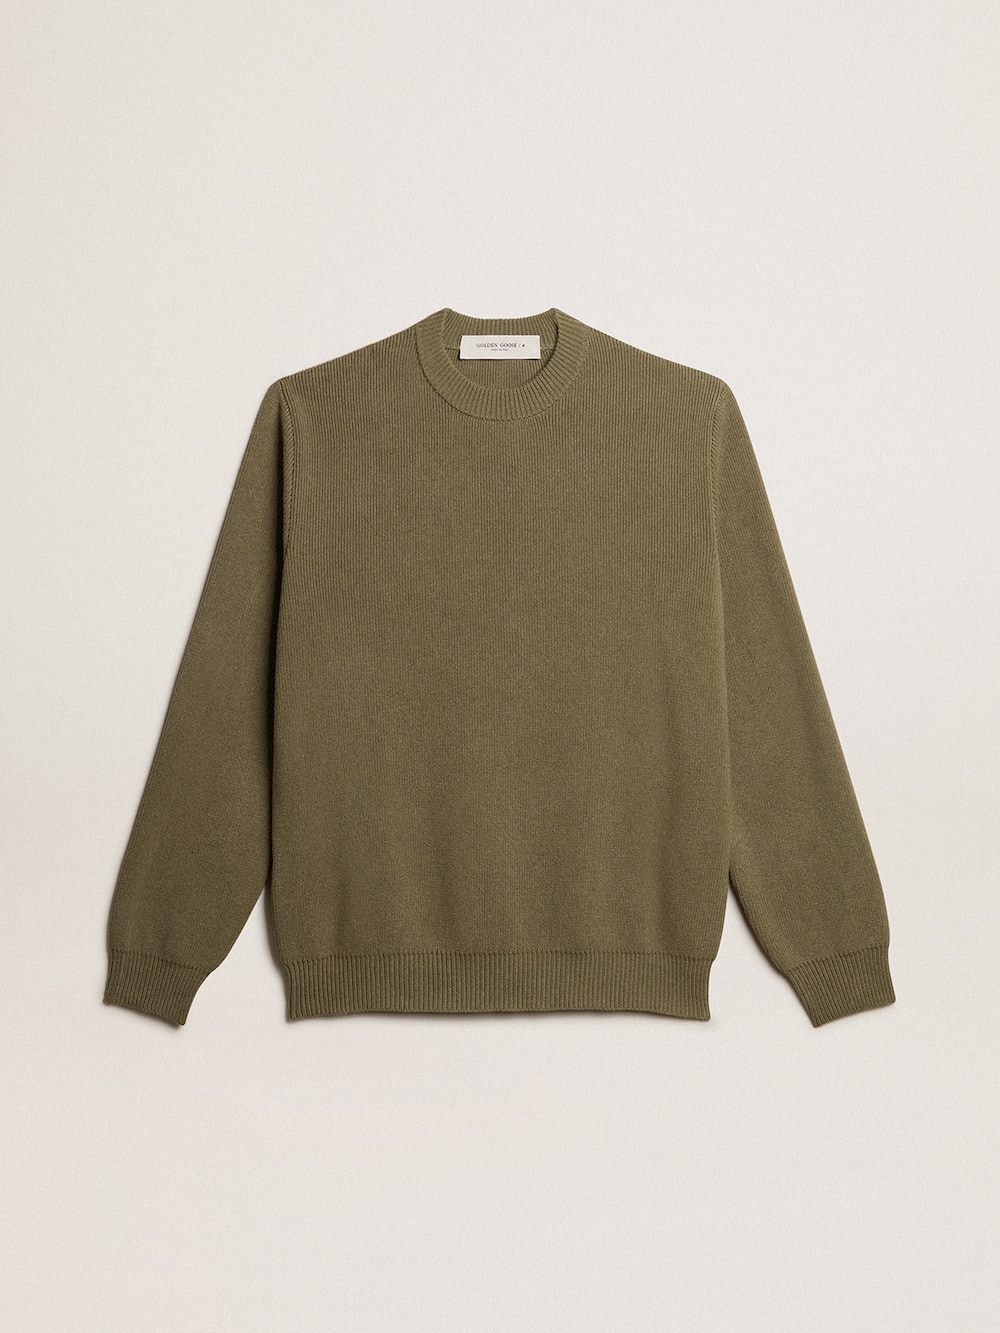 Golden Goose - Men’s round-neck sweater in cotton with logo on the back in 